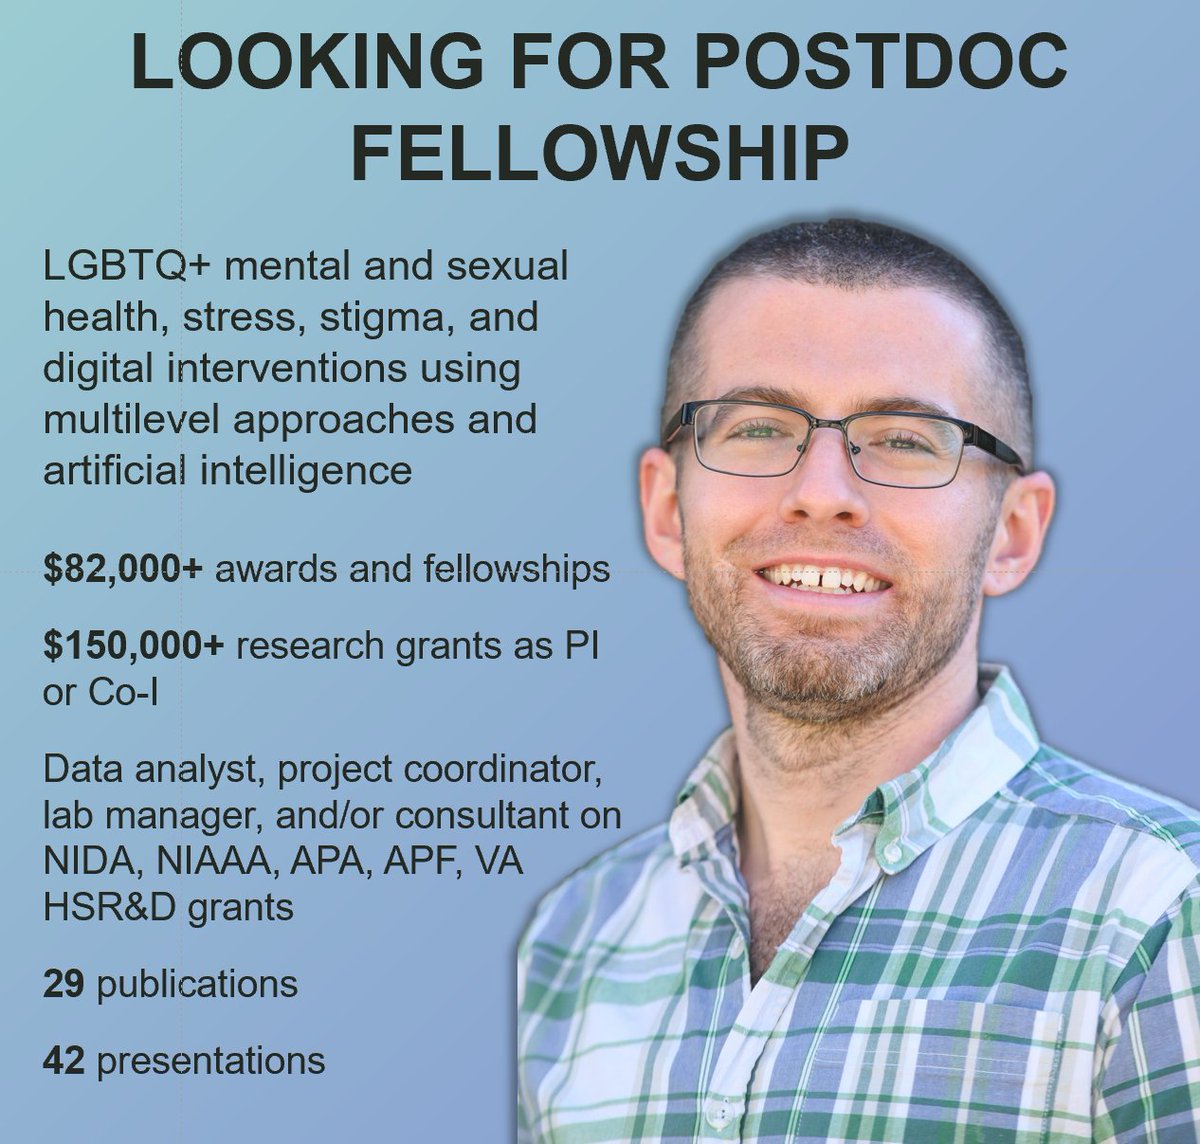 Hi everyone! I am searching for postdoctoral fellowship positions in #LGBTQ+ health. Please keep me in mind as you come across new listings. 🏳️‍🌈🌈